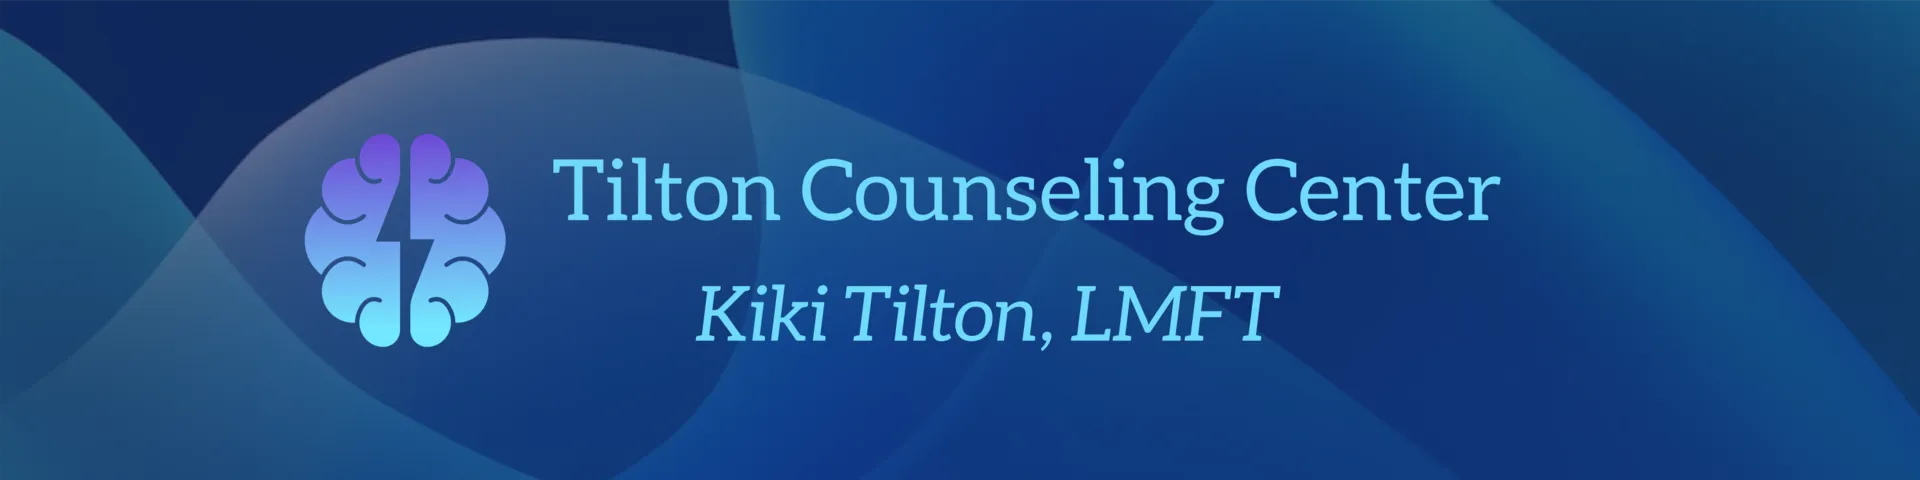 Tilton Counseling Center- Direct Neurofeedback and Counseling